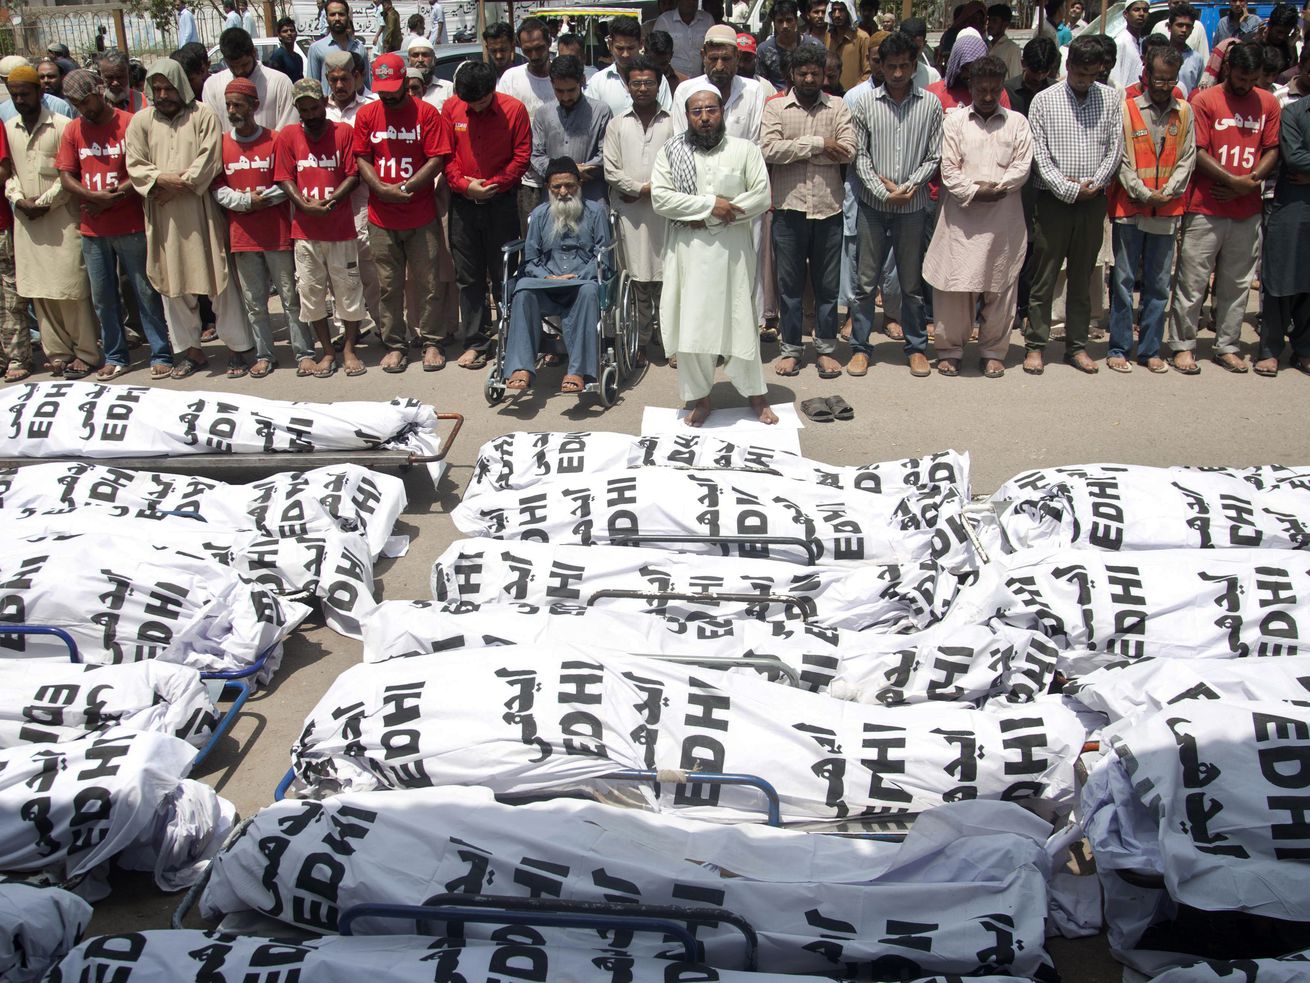 In this Friday, June 26, 2015 file photo, mourners attend a funeral for unclaimed people who died of extreme weather, in Karachi, Pakistan, after a devastating heat wave that struck southern Pakistan the previous weekend, with over 800 confirmed deaths according to a senior health official.